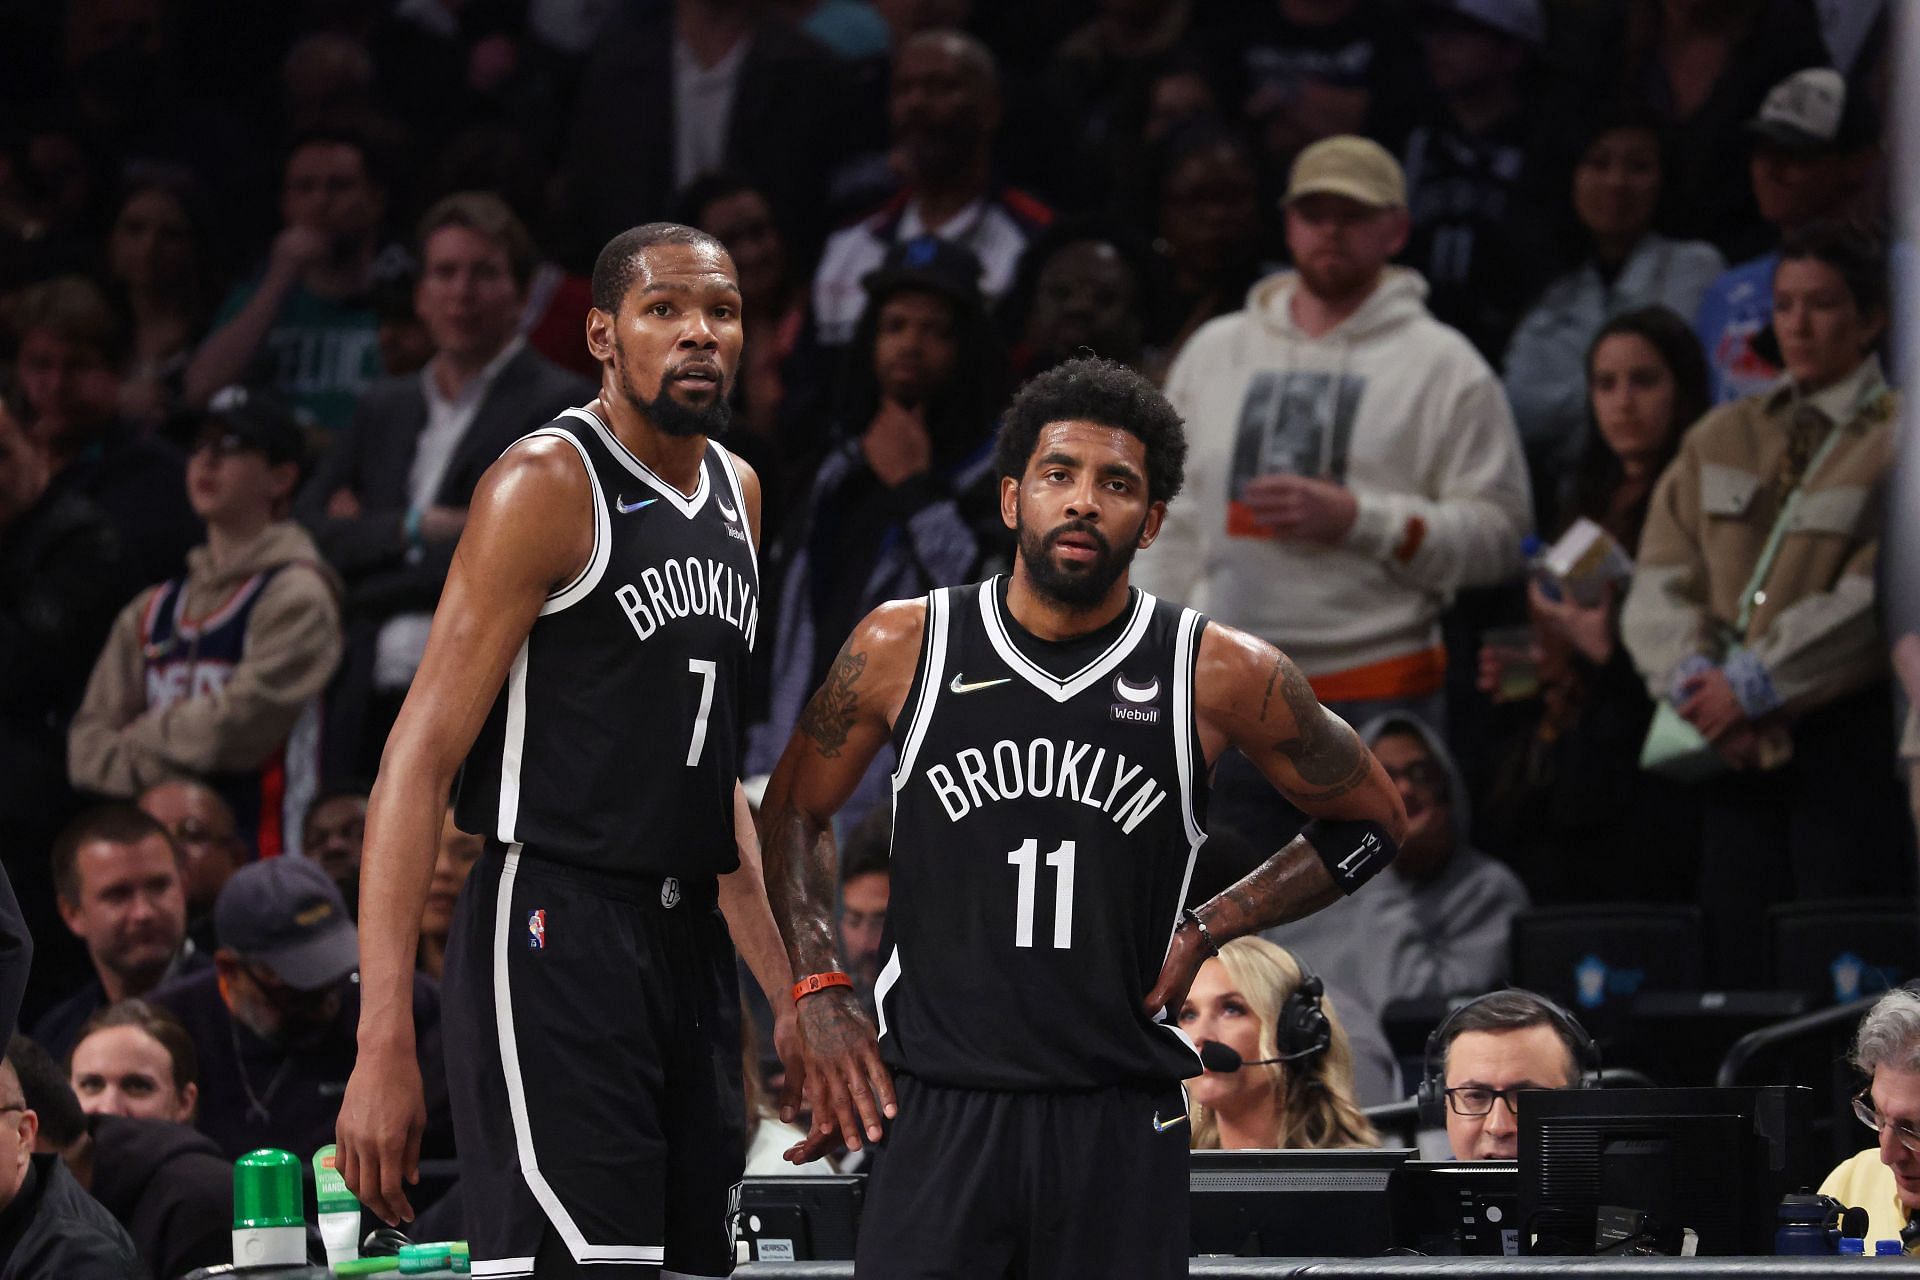 Kyrie Irving now just wants to play for the Brooklyn Nets whether Kevin Durant remains there or not.